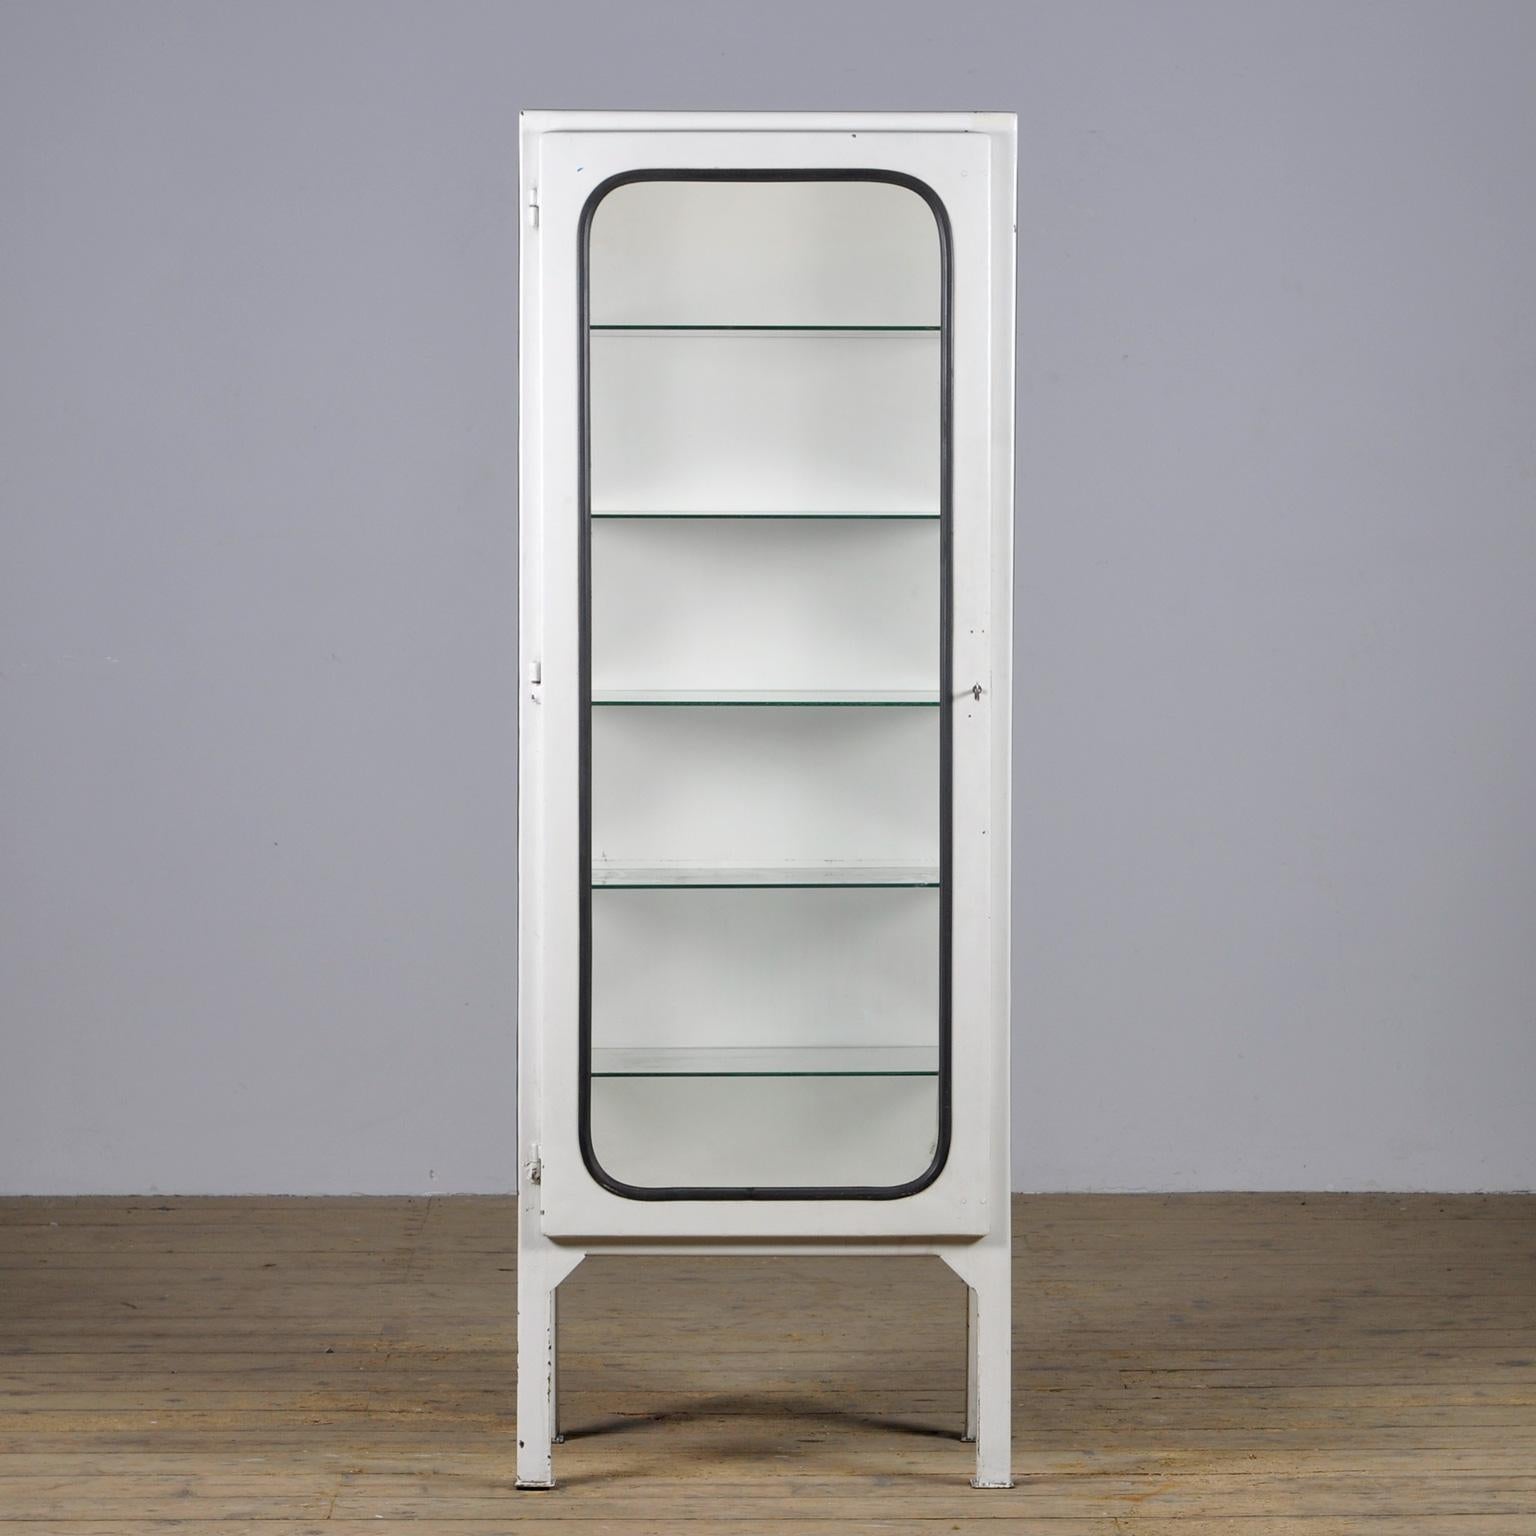 This medical cabinet was designed in the 1970s and produced in 1975 in hungary. It is made from steel and antique glass, the glass is held in place by a black rubber strip. The cabinet features five adjustable glass shelves and a functioning